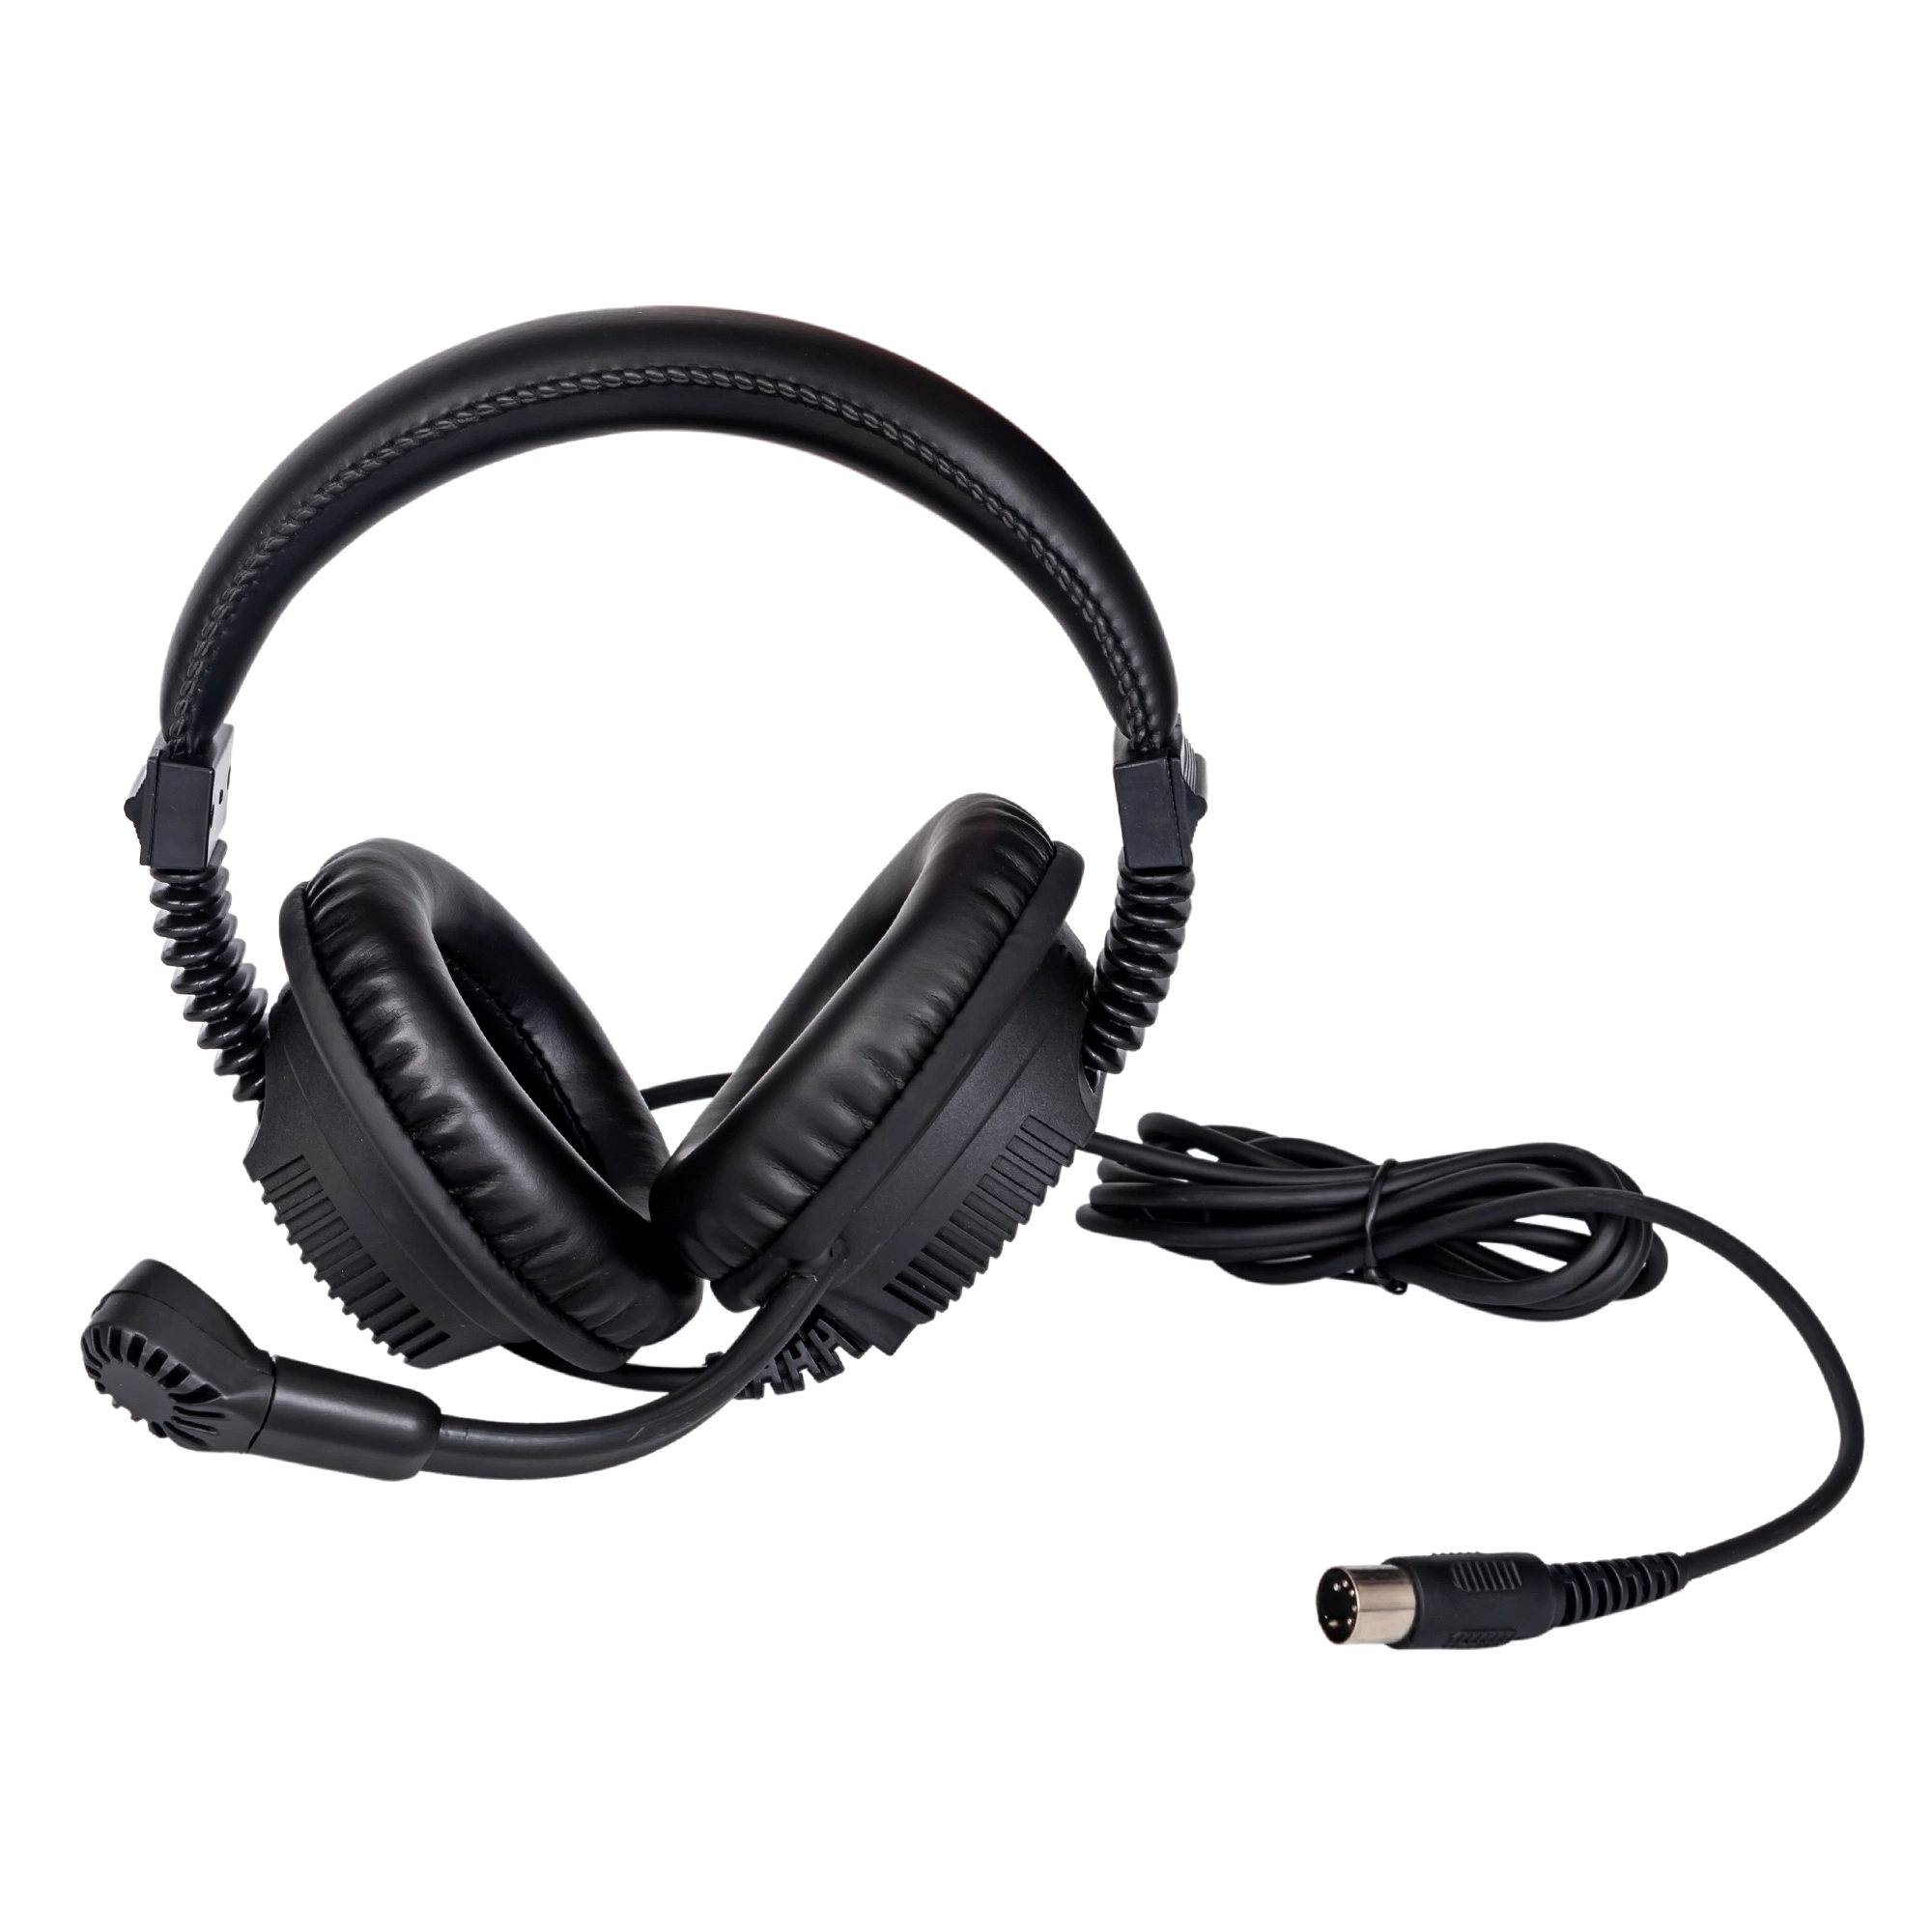 Hot Language Lab Headset Computer Lab English Learning High Quality Noise Cancelling Headset 2*3.5mm 5 DIN Rj12 Headphone Wired Business for School